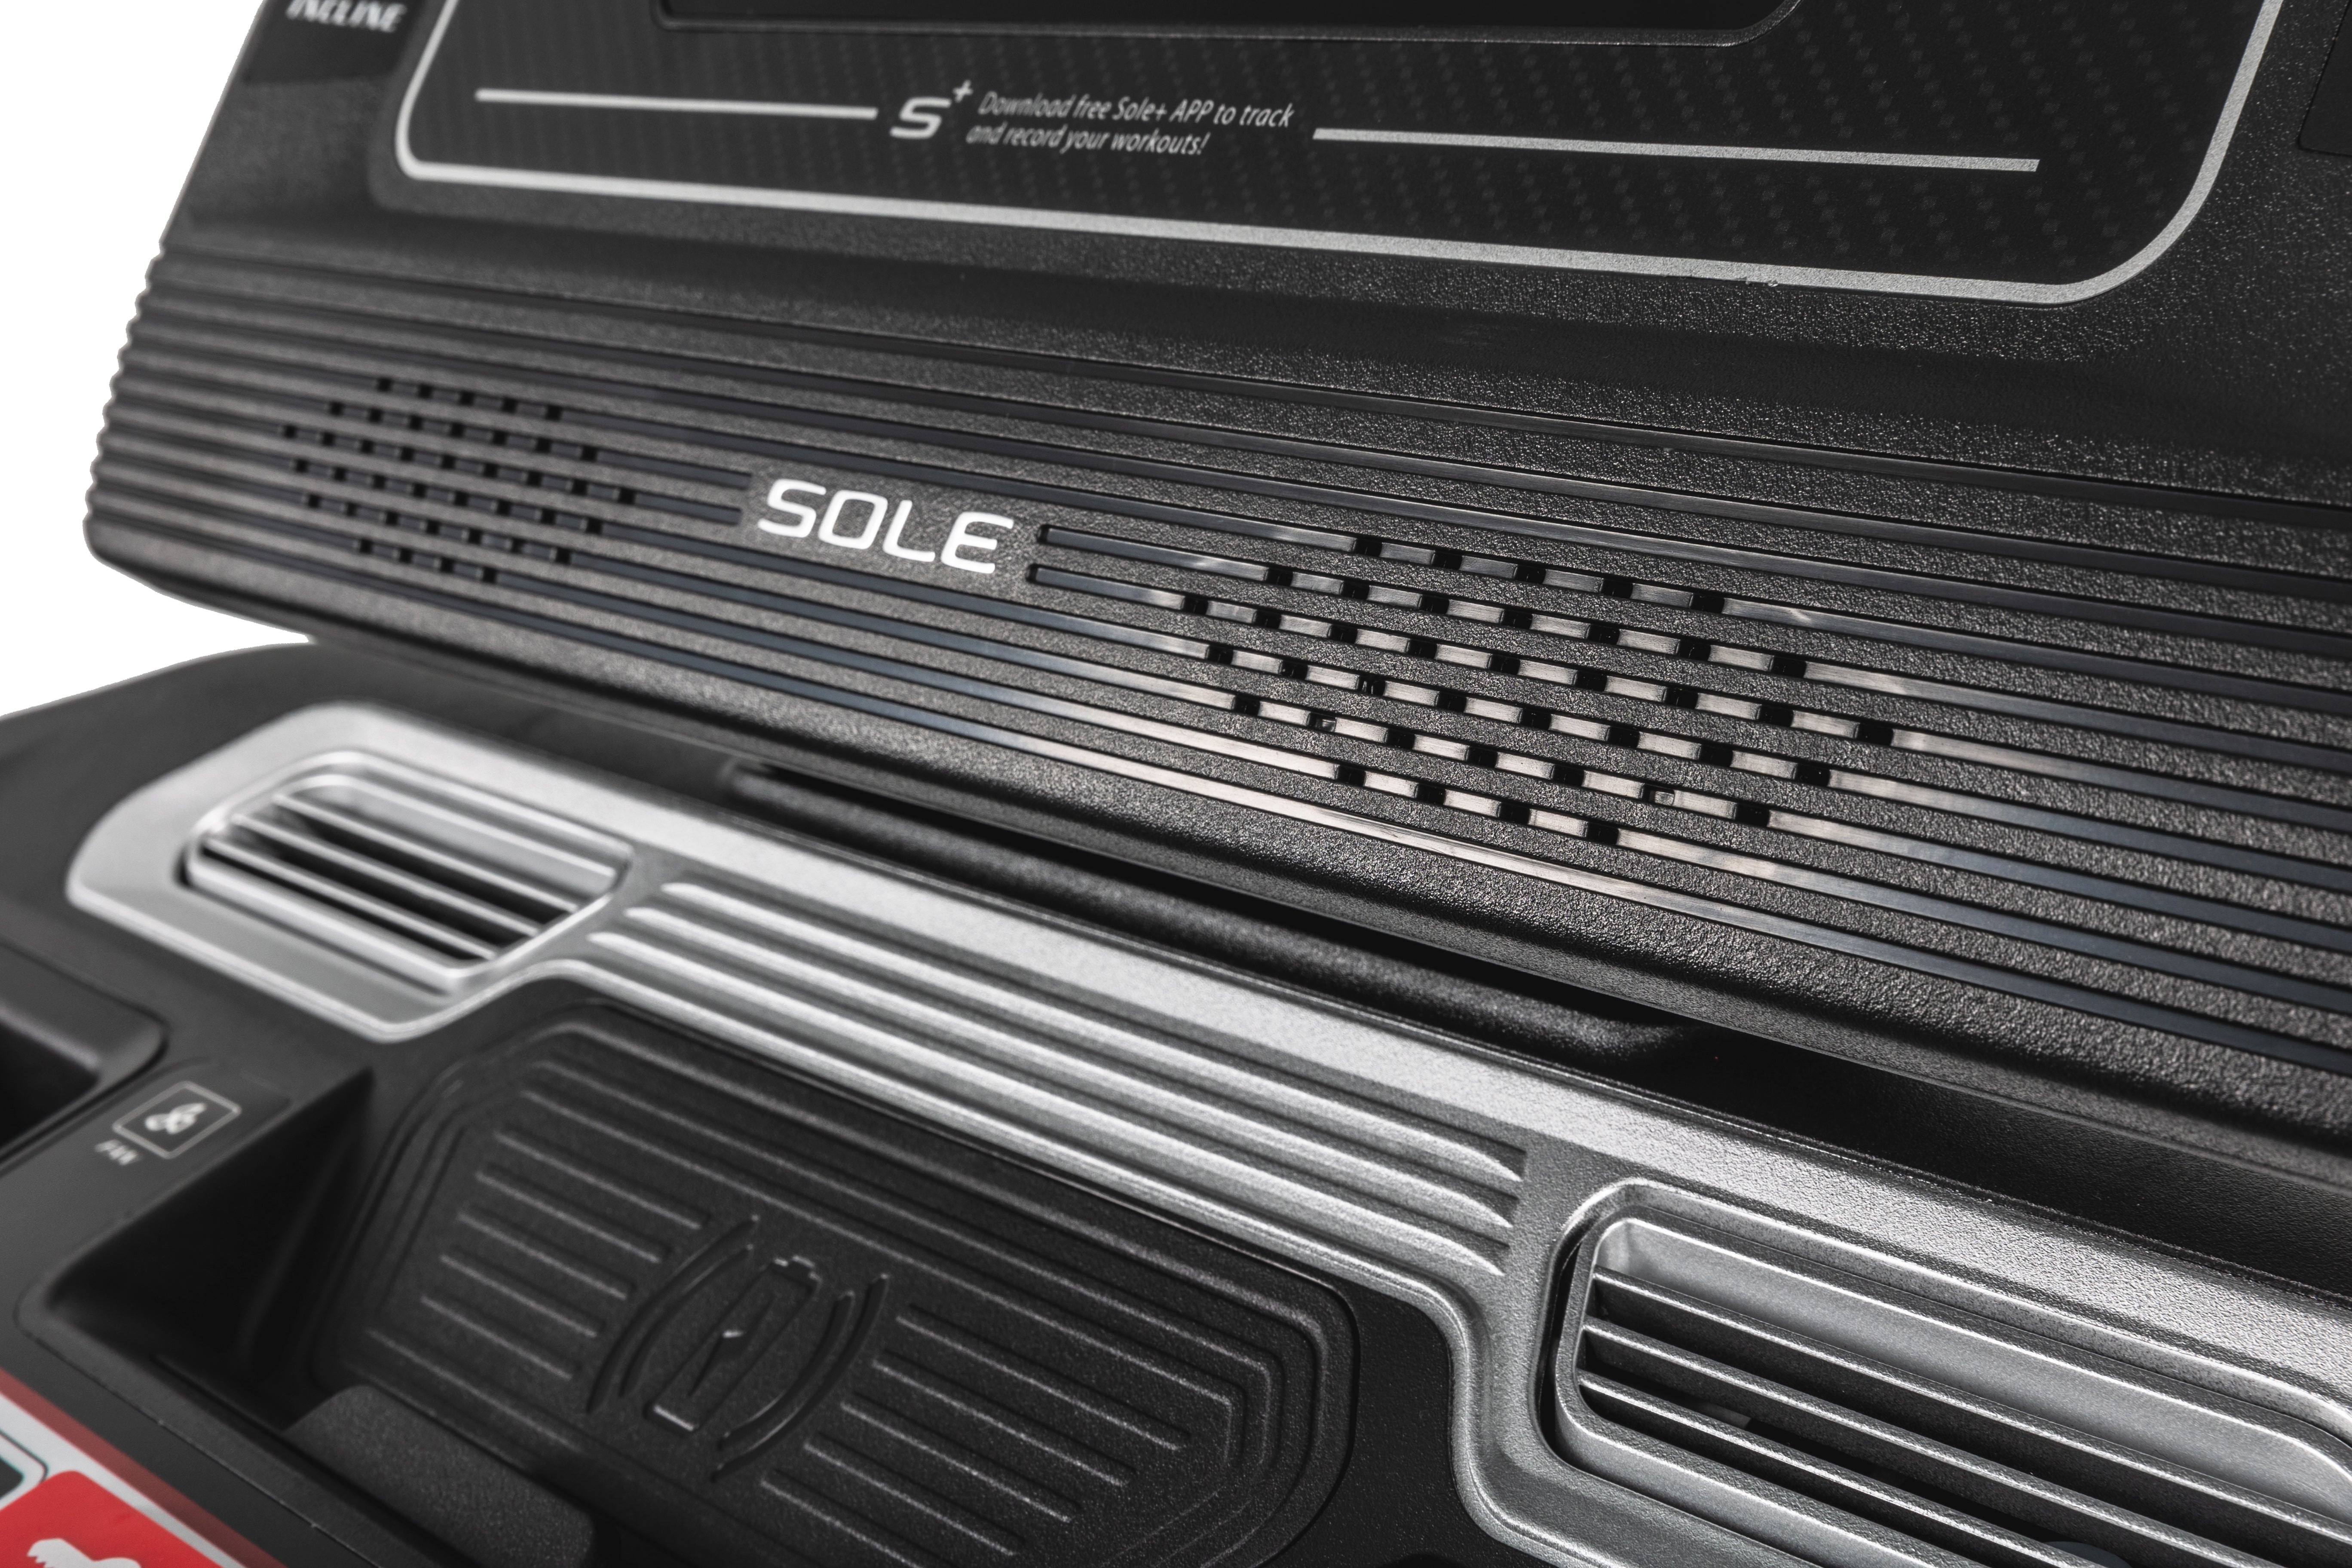 Detail shot of the Sole F80 treadmill's front panel, showcasing the textured grip surface, vented area, embossed 'SOLE' logo, and a molded storage compartment with ridged design.